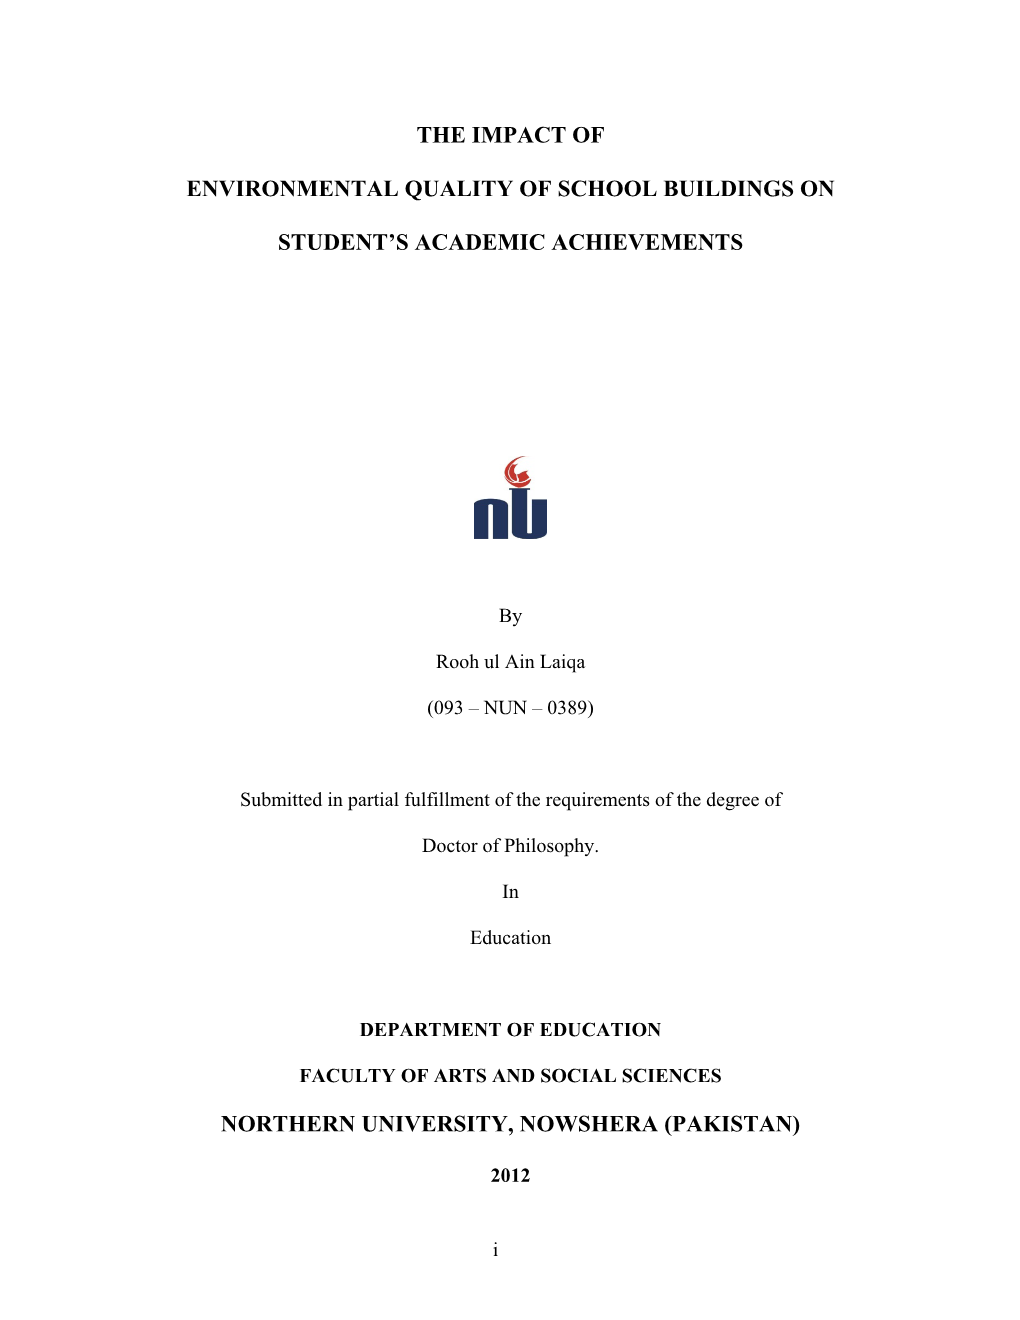 The Impact of Environmental Quality of School Buildings on Student's